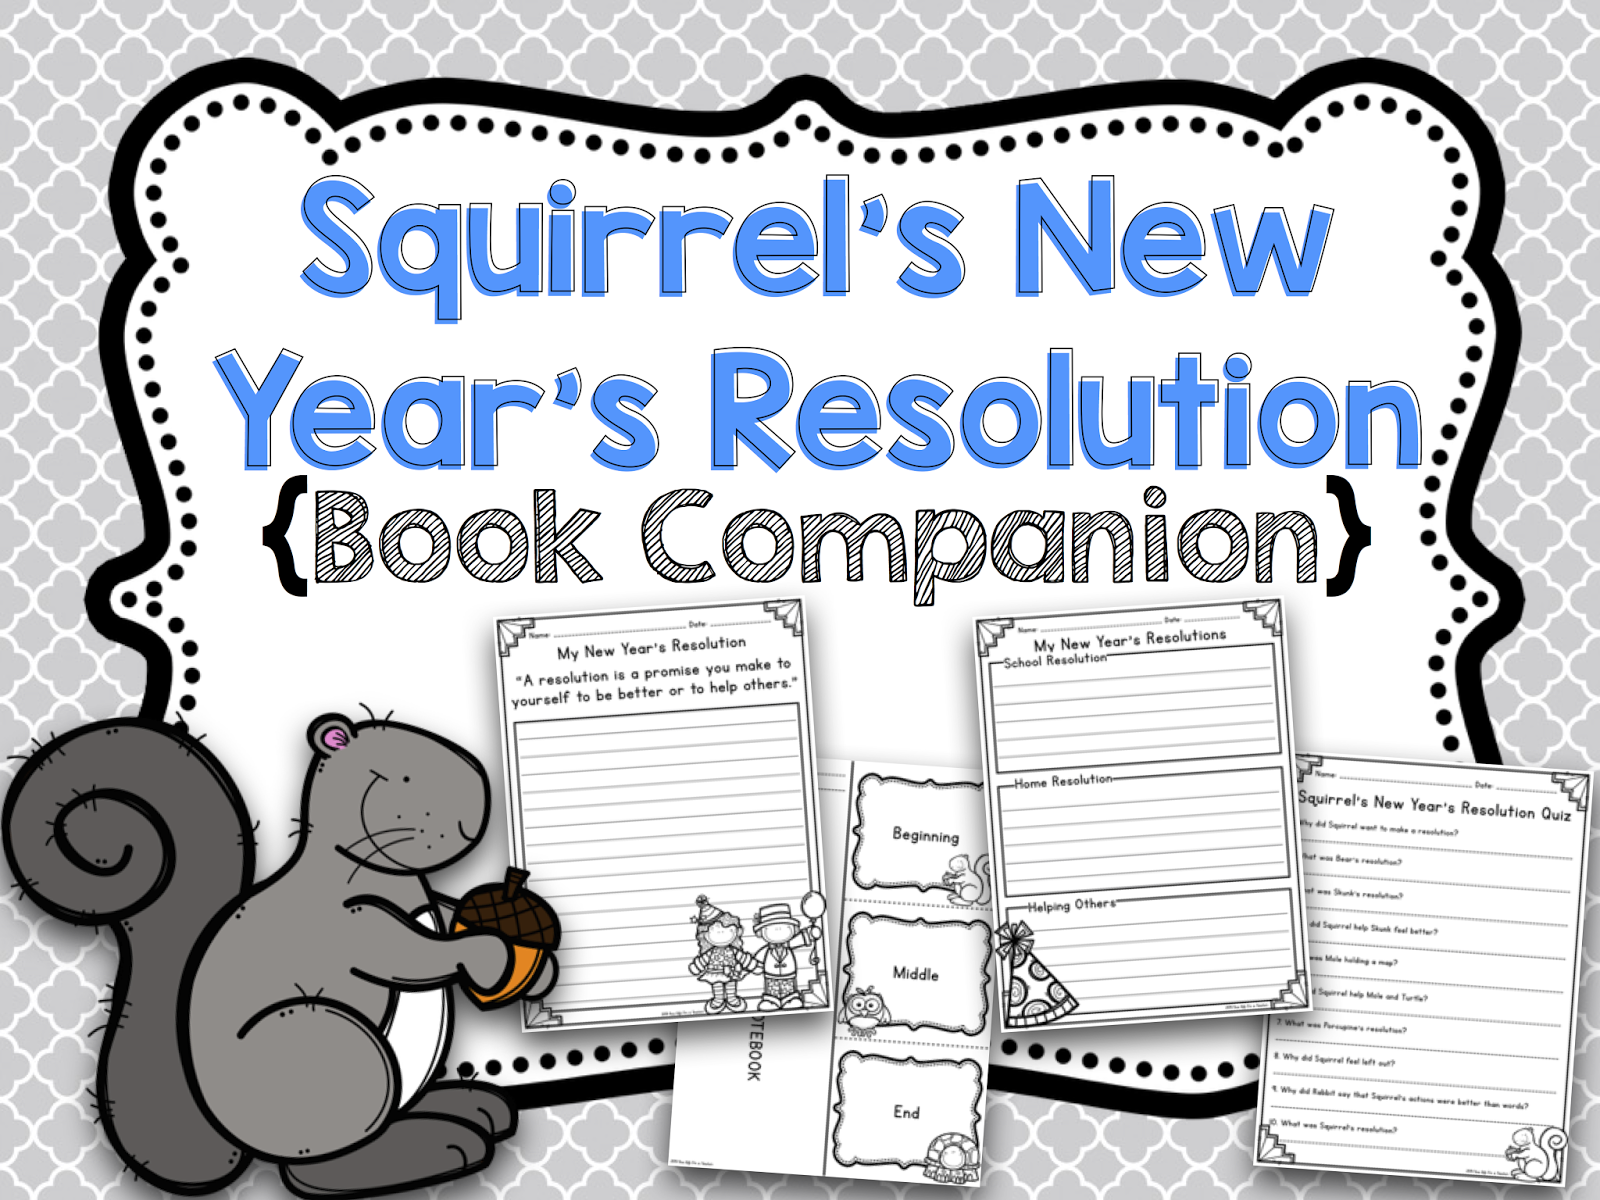 Reading my favourite book. Squirrel's New year's Resolution teacher. Growth Mindset book. Resolution in book.